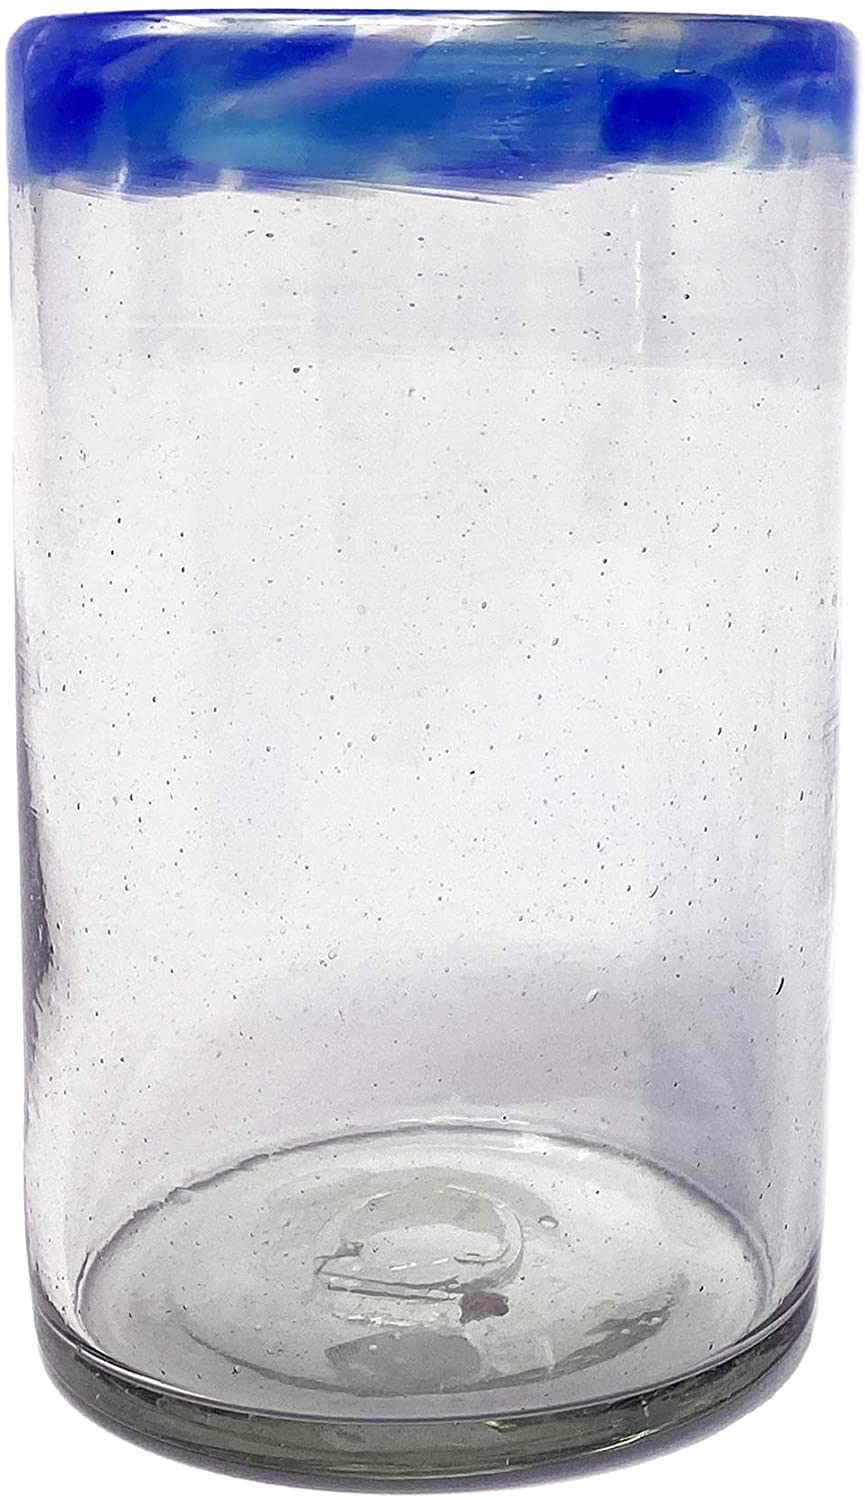 Axiam 16 oz Old Fashioned Drinking Glass Set - Life Soleil